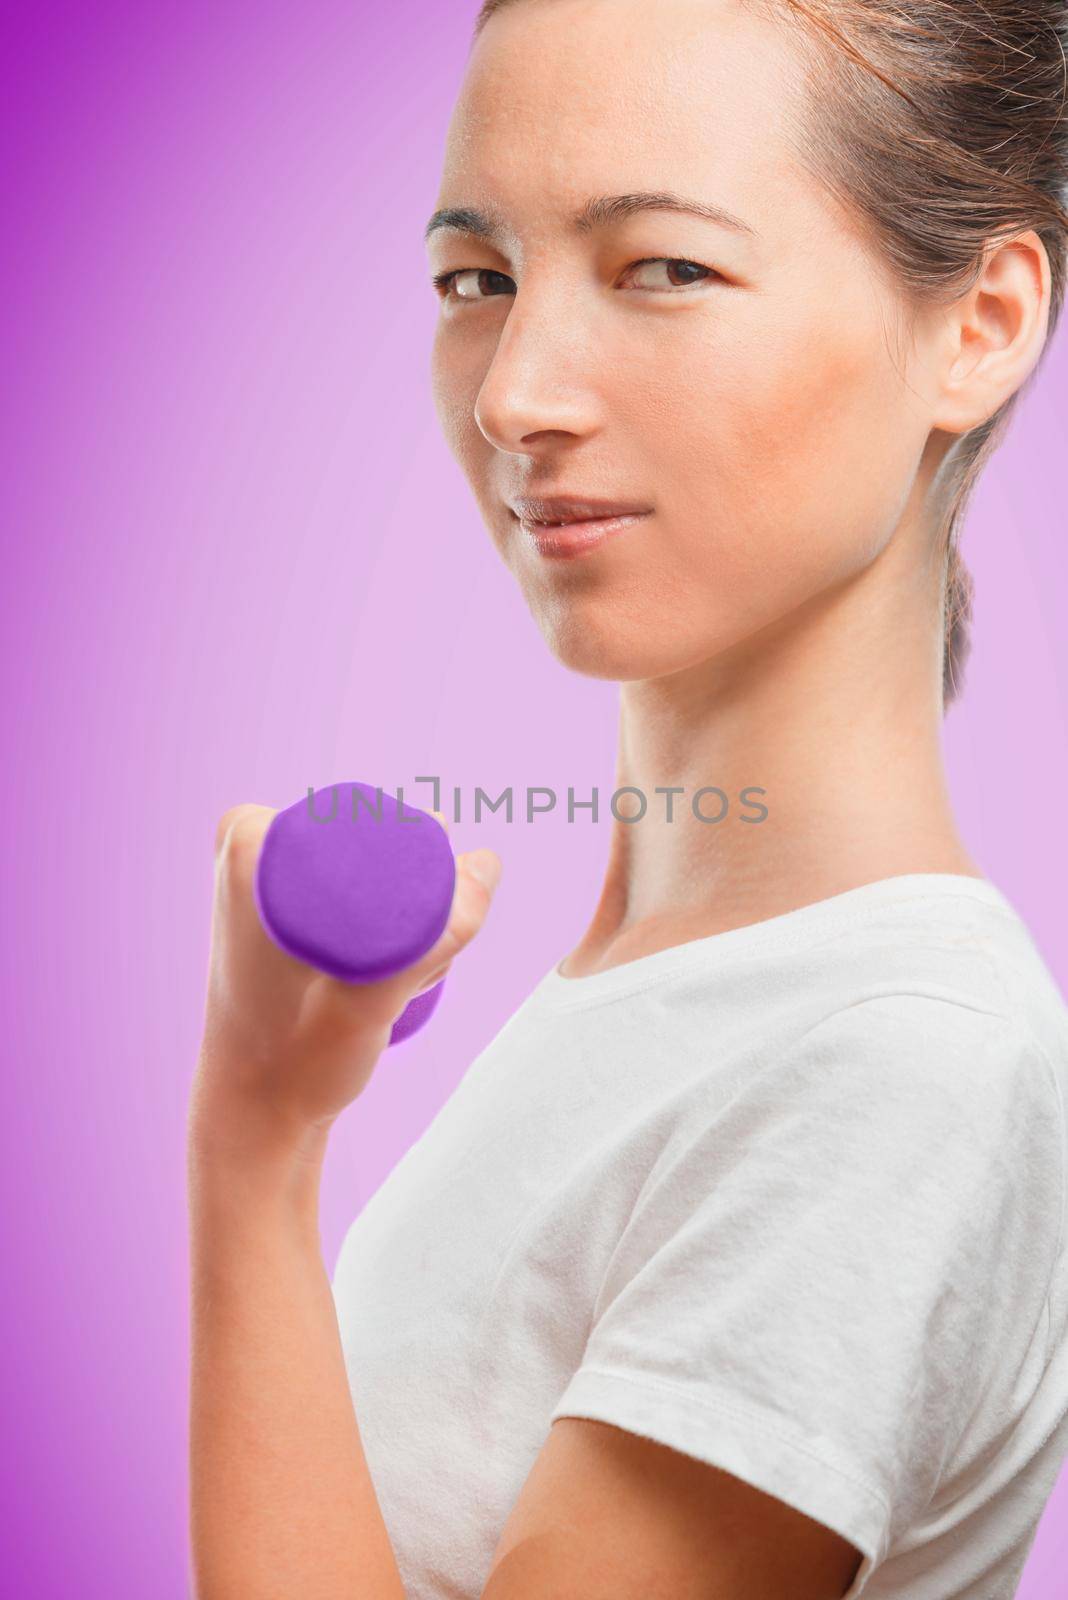 Woman exercises with a dumbbell, side view